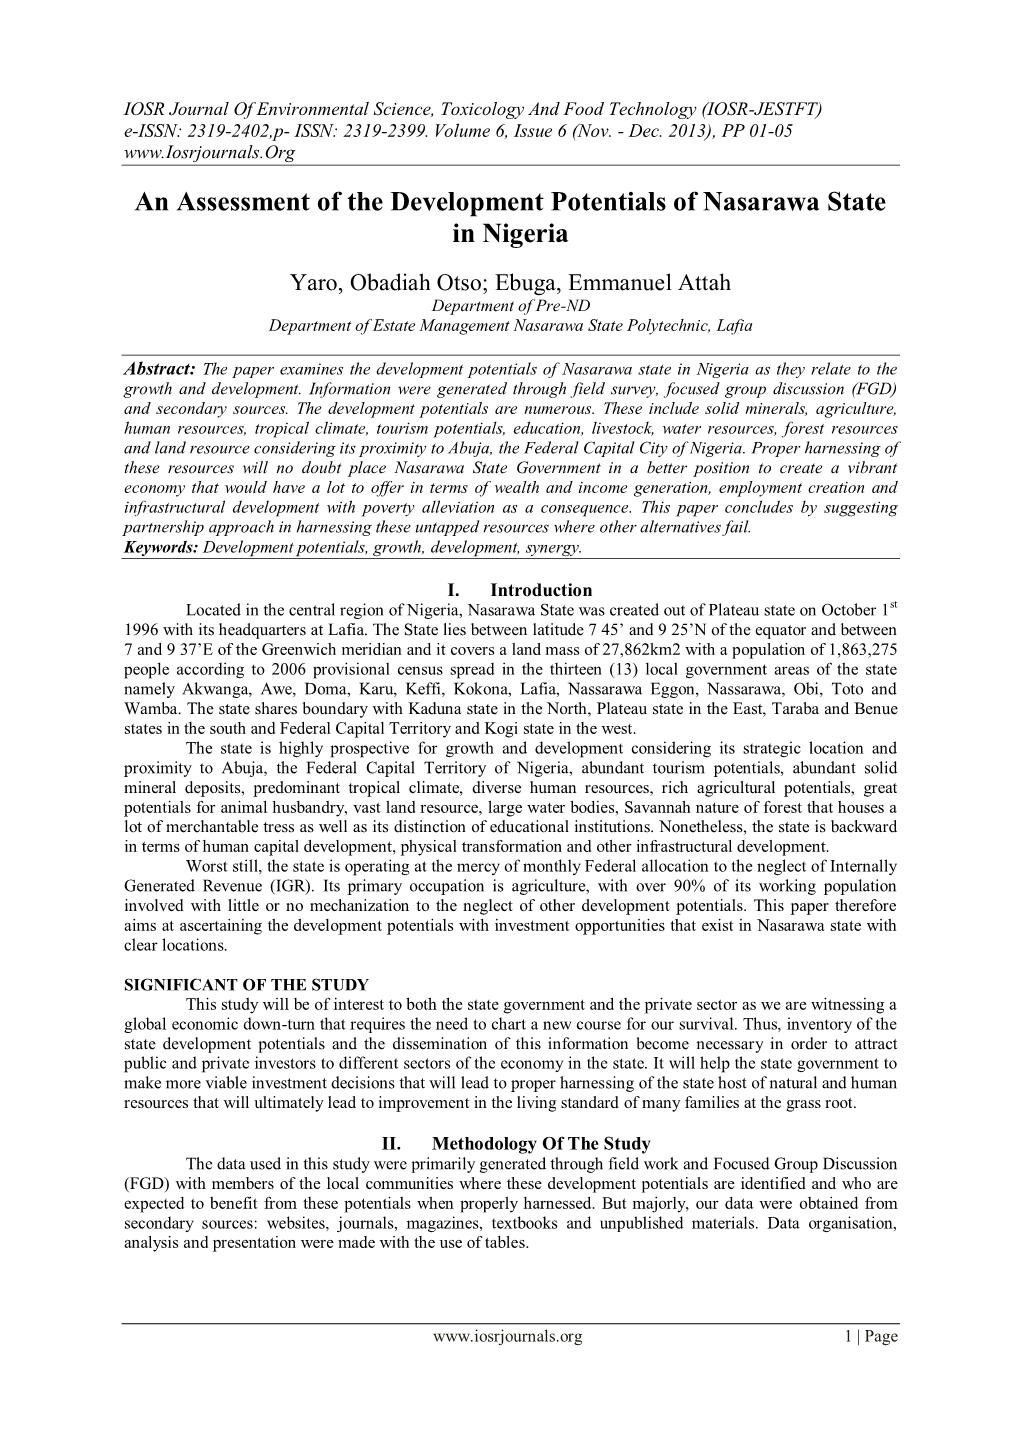 An Assessment of the Development Potentials of Nasarawa State in Nigeria